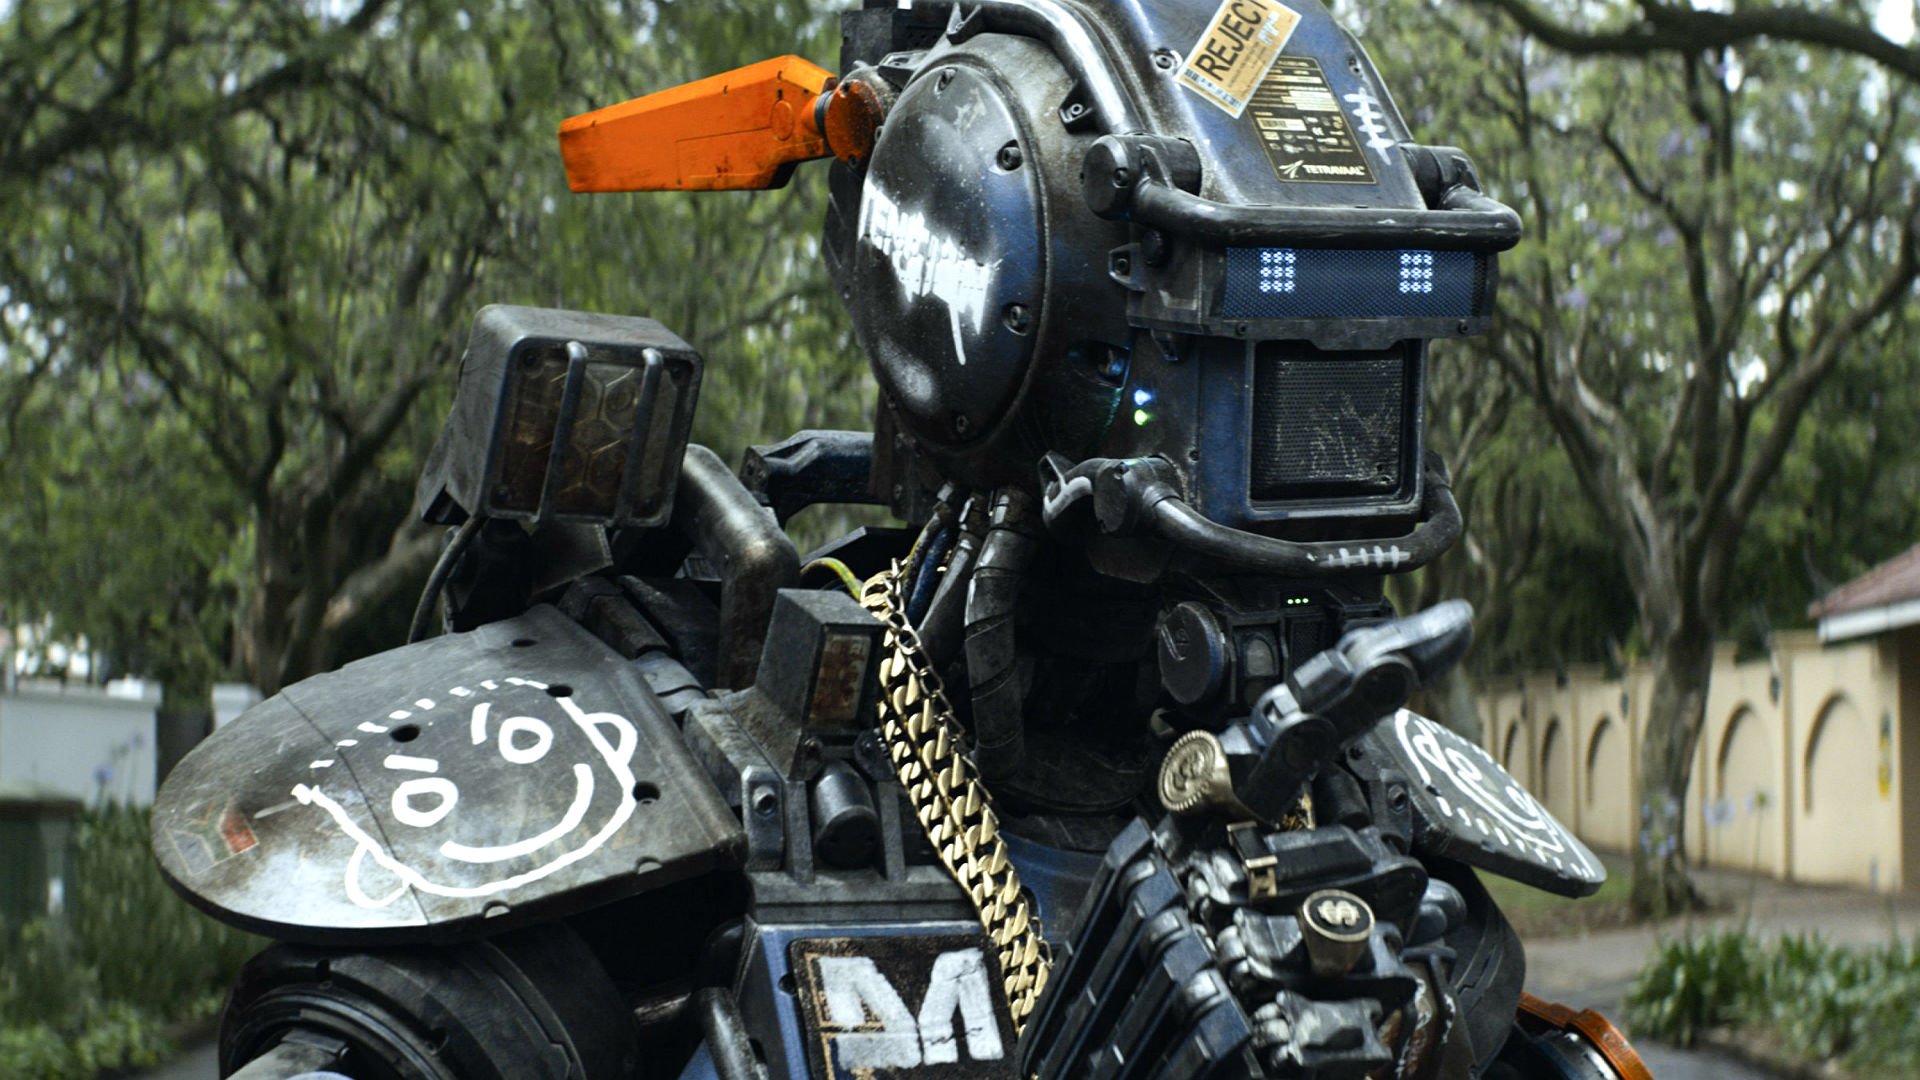 chappie, Sci fi, Futuristic, Action, Thriller, Robot, Cyborg, Action, 1chappie Wallpaper